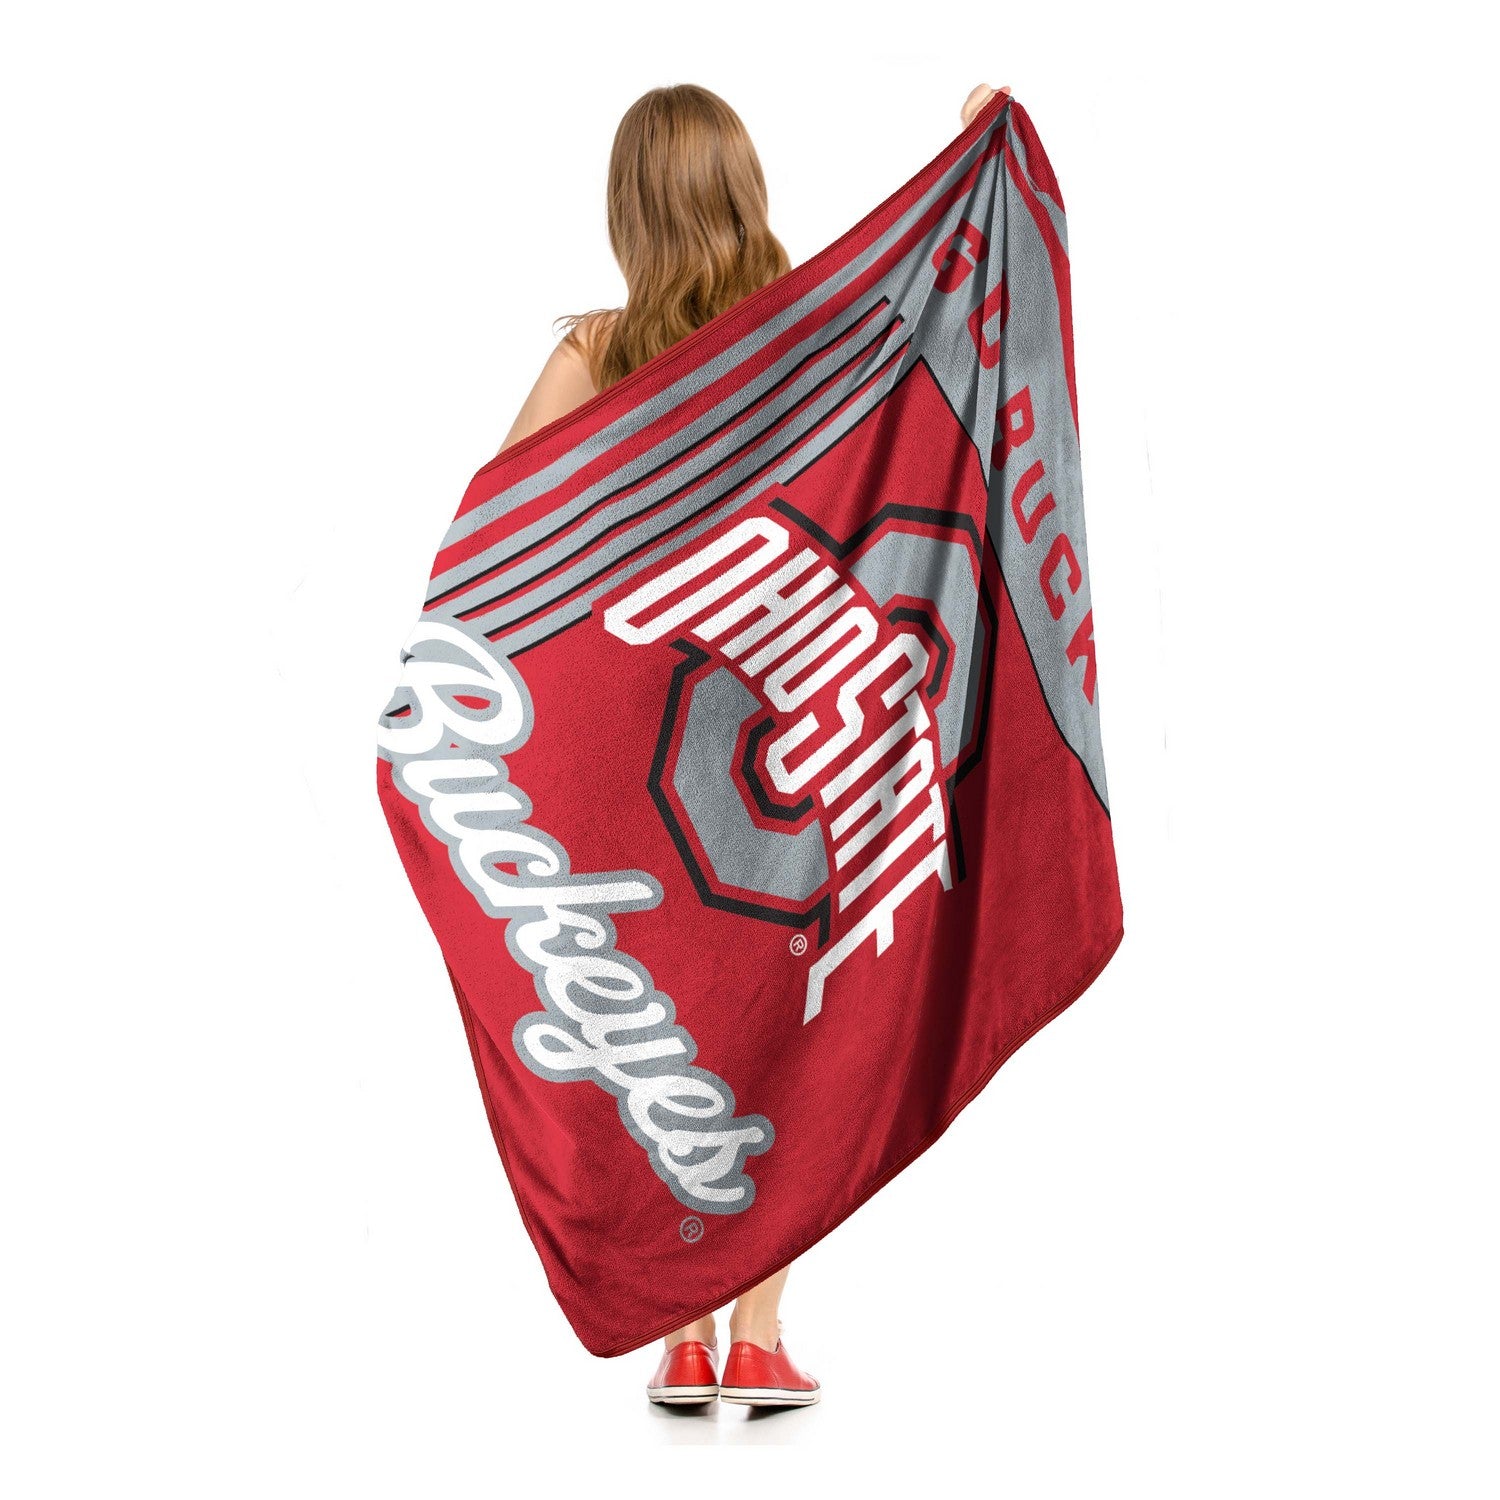 Ohio State Buckeyes NCAA Officially Licensed Throw Blanket 46x60